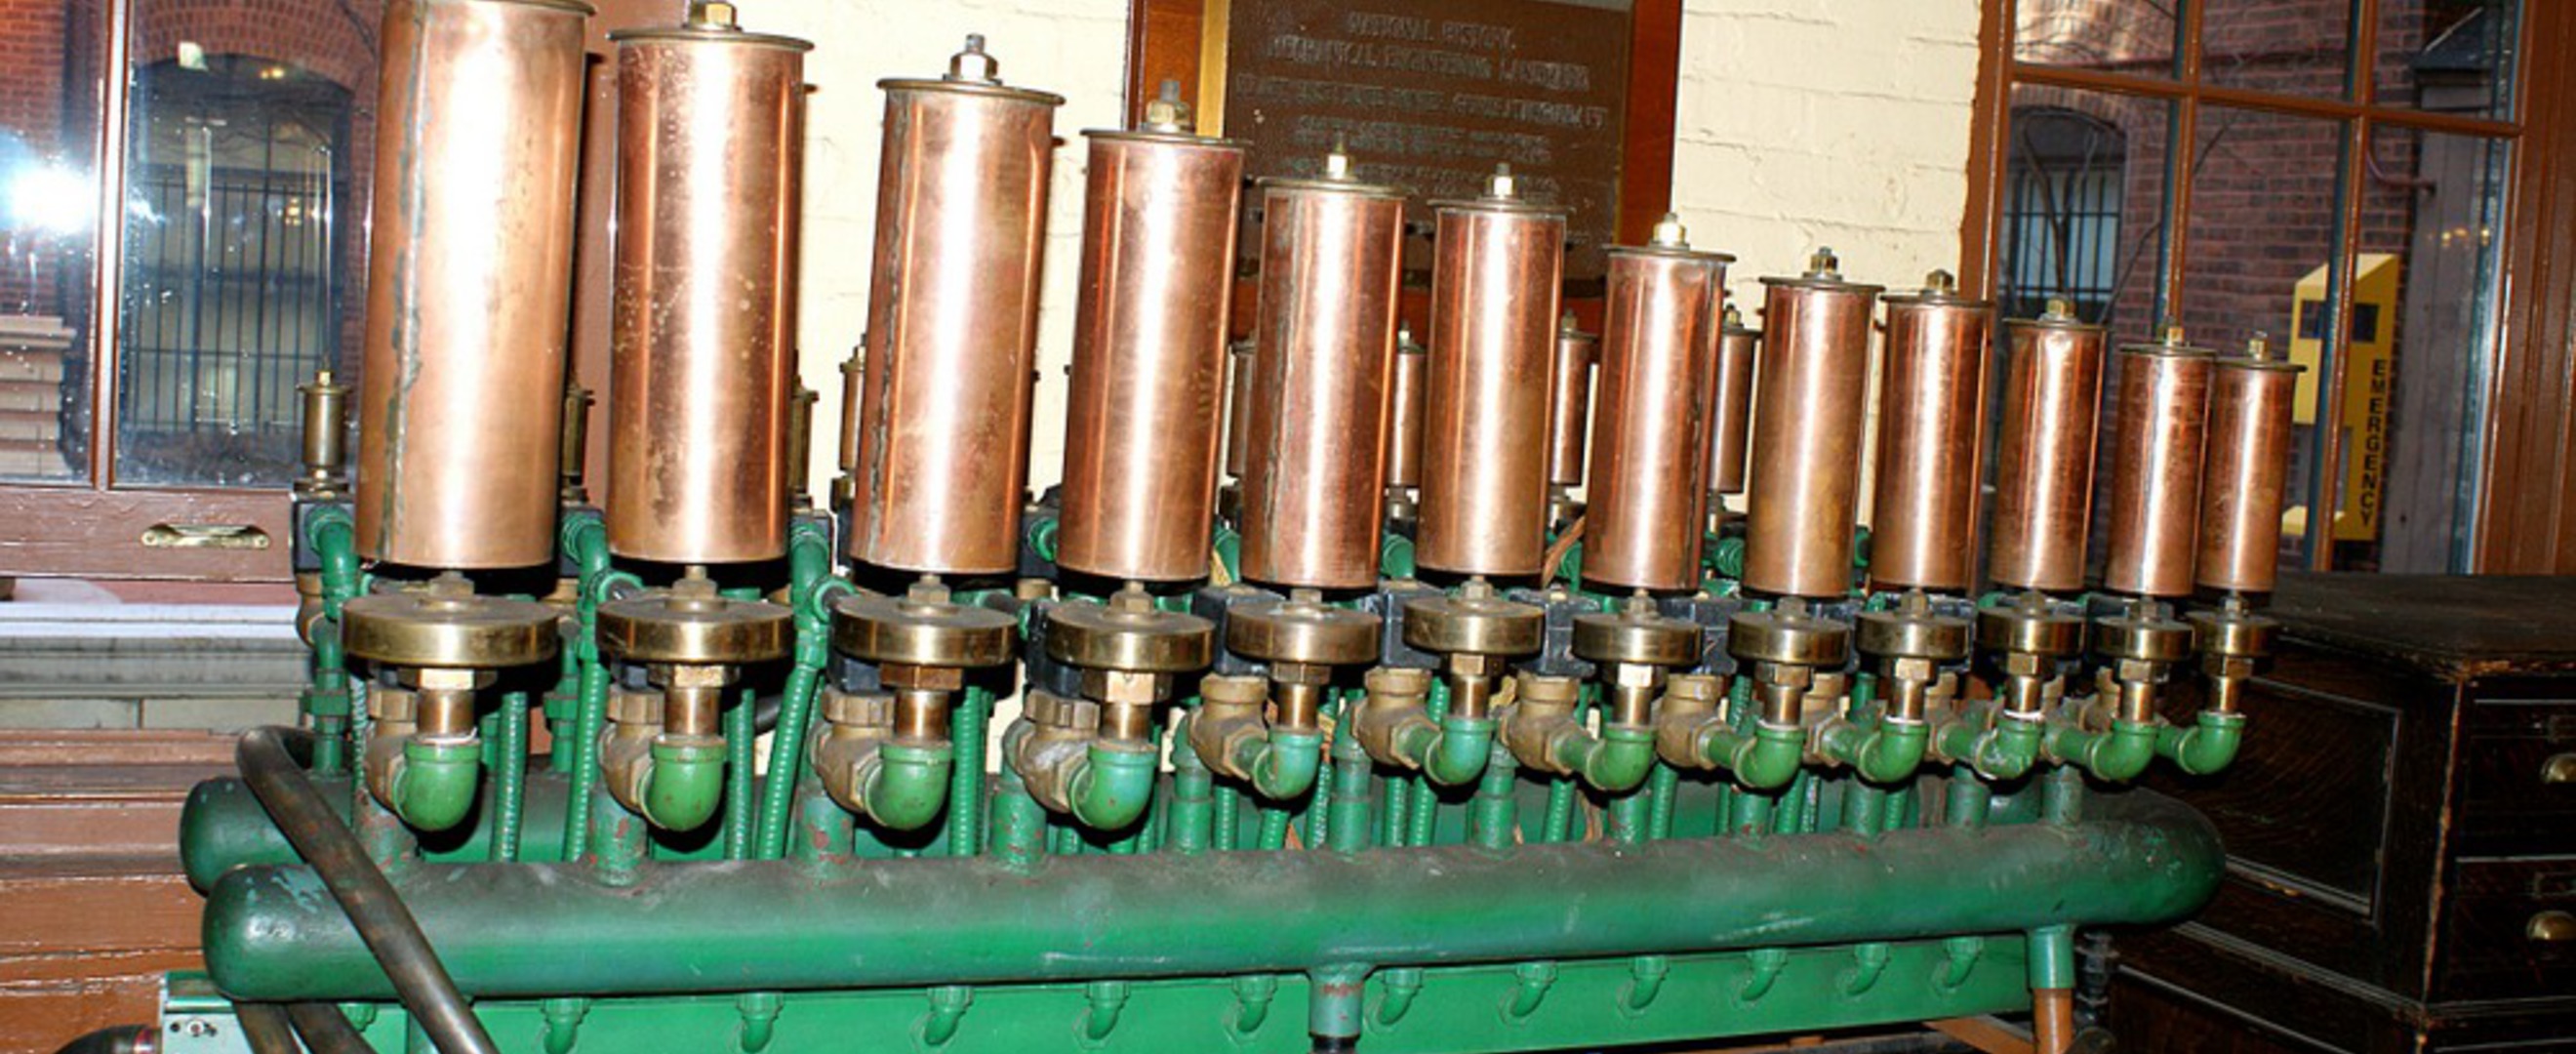 A steam-driven calliope, on display at CRMII